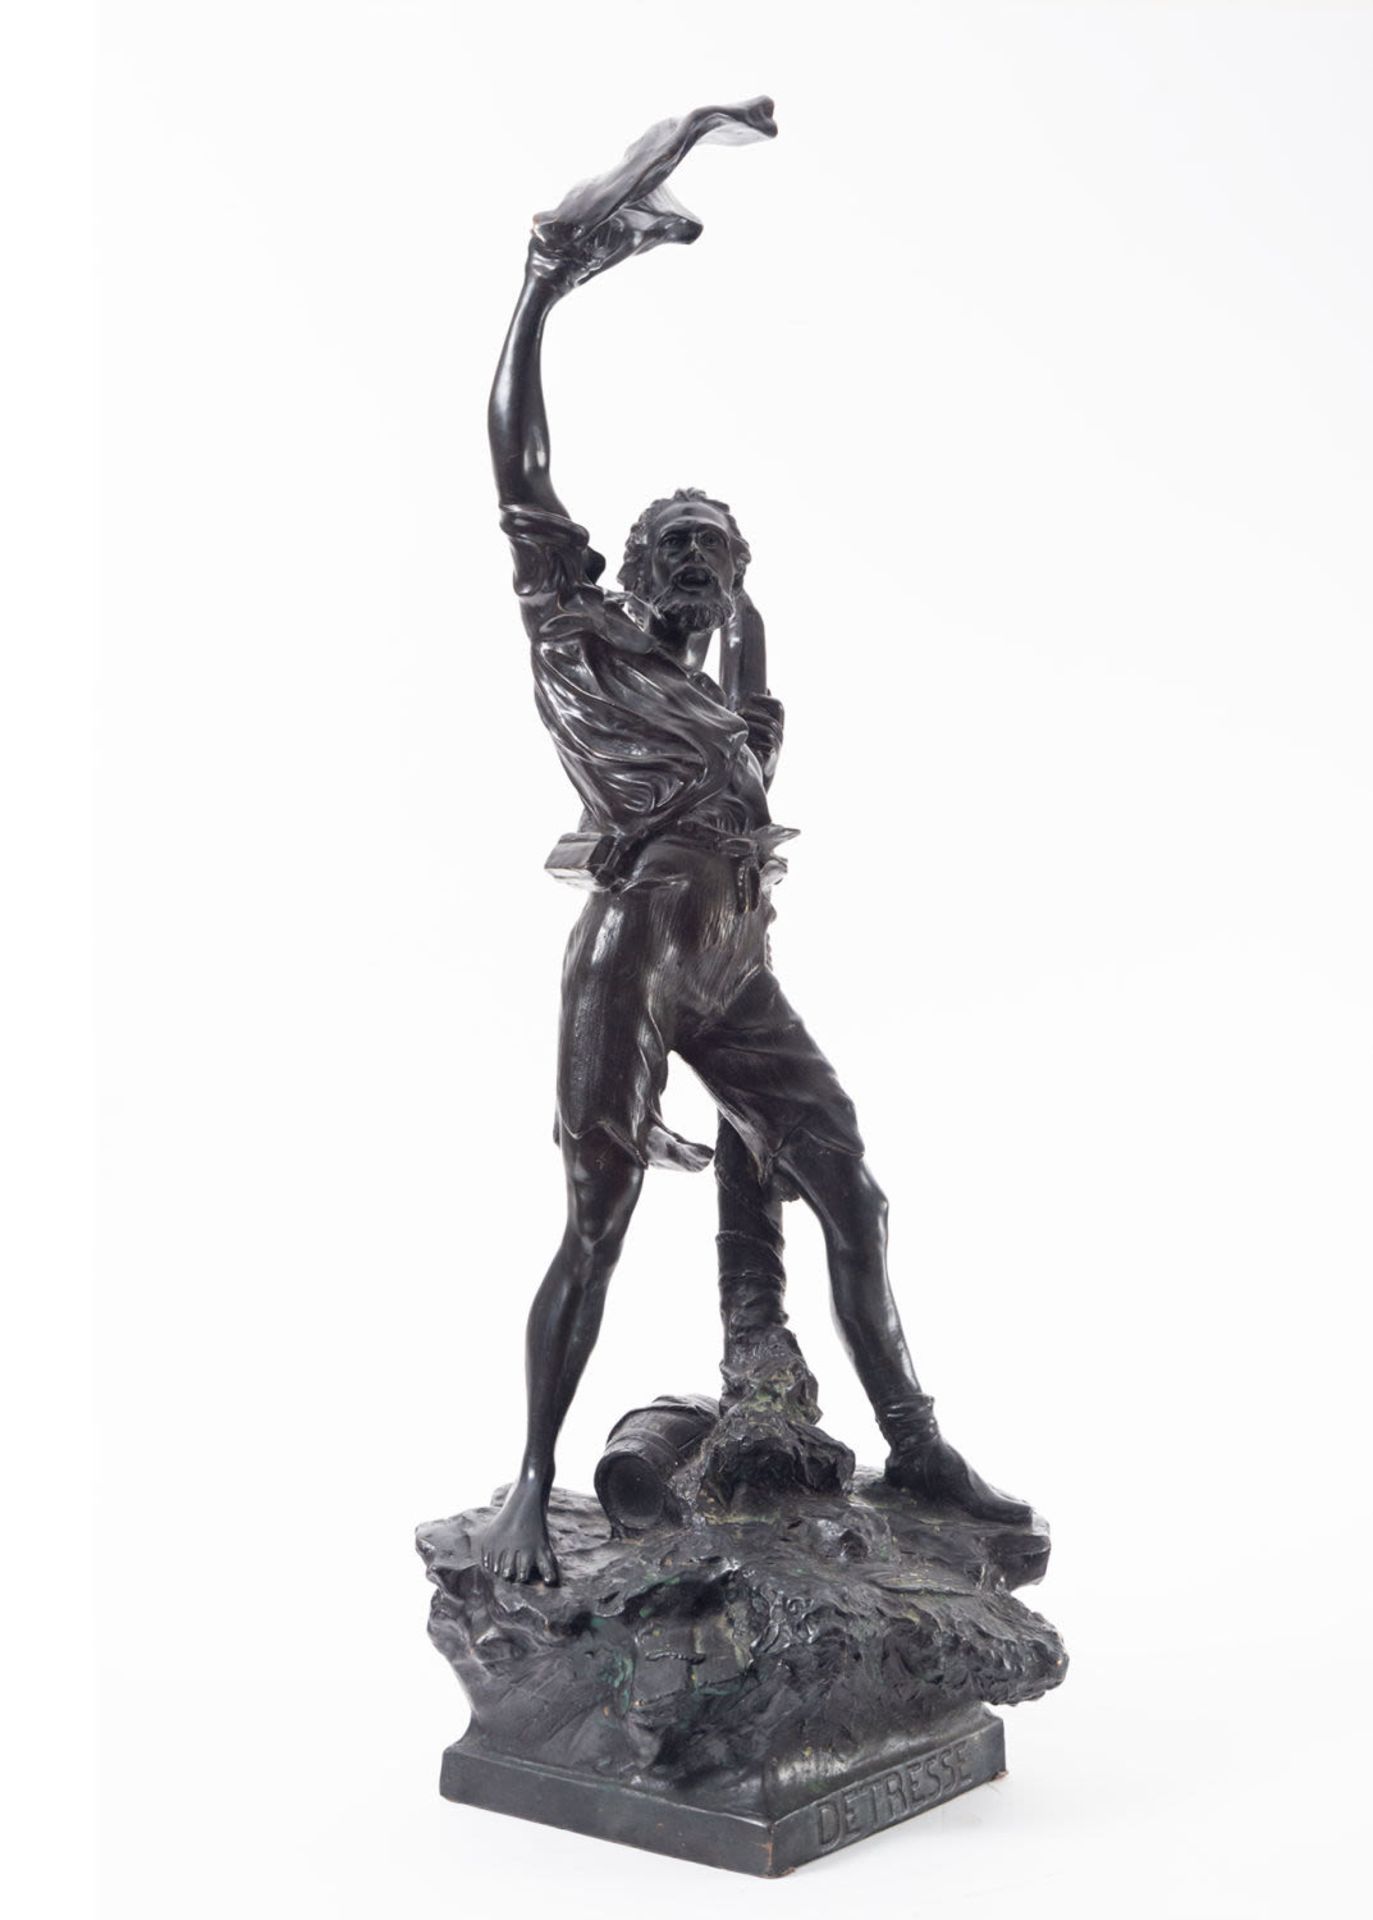 Detresse, castaway figure in patinated bronze, German school from the beginning of the 20th century - Image 5 of 7